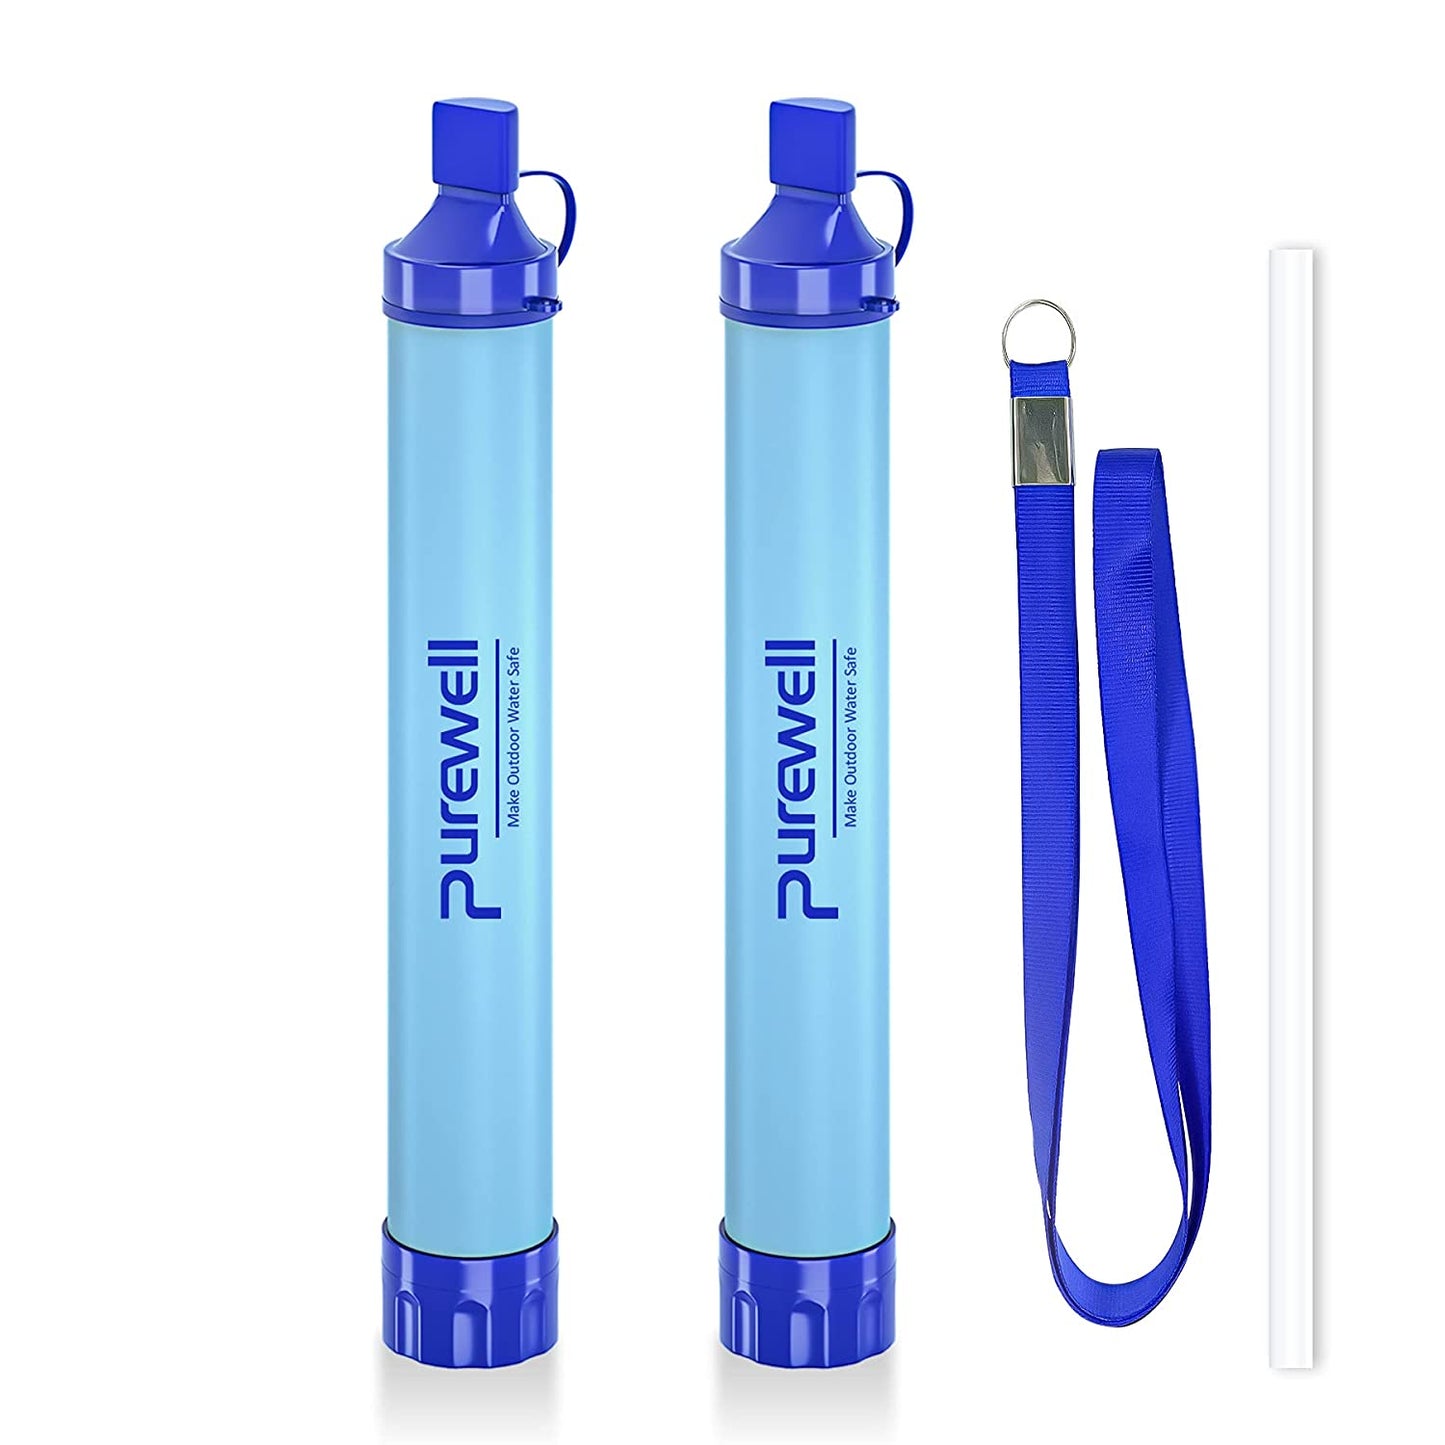 Outdoor Water Filter Personal Water Filtration Straw Emergency Survival Gear Water Purifier for Camping Hiking Climbing Backpacking